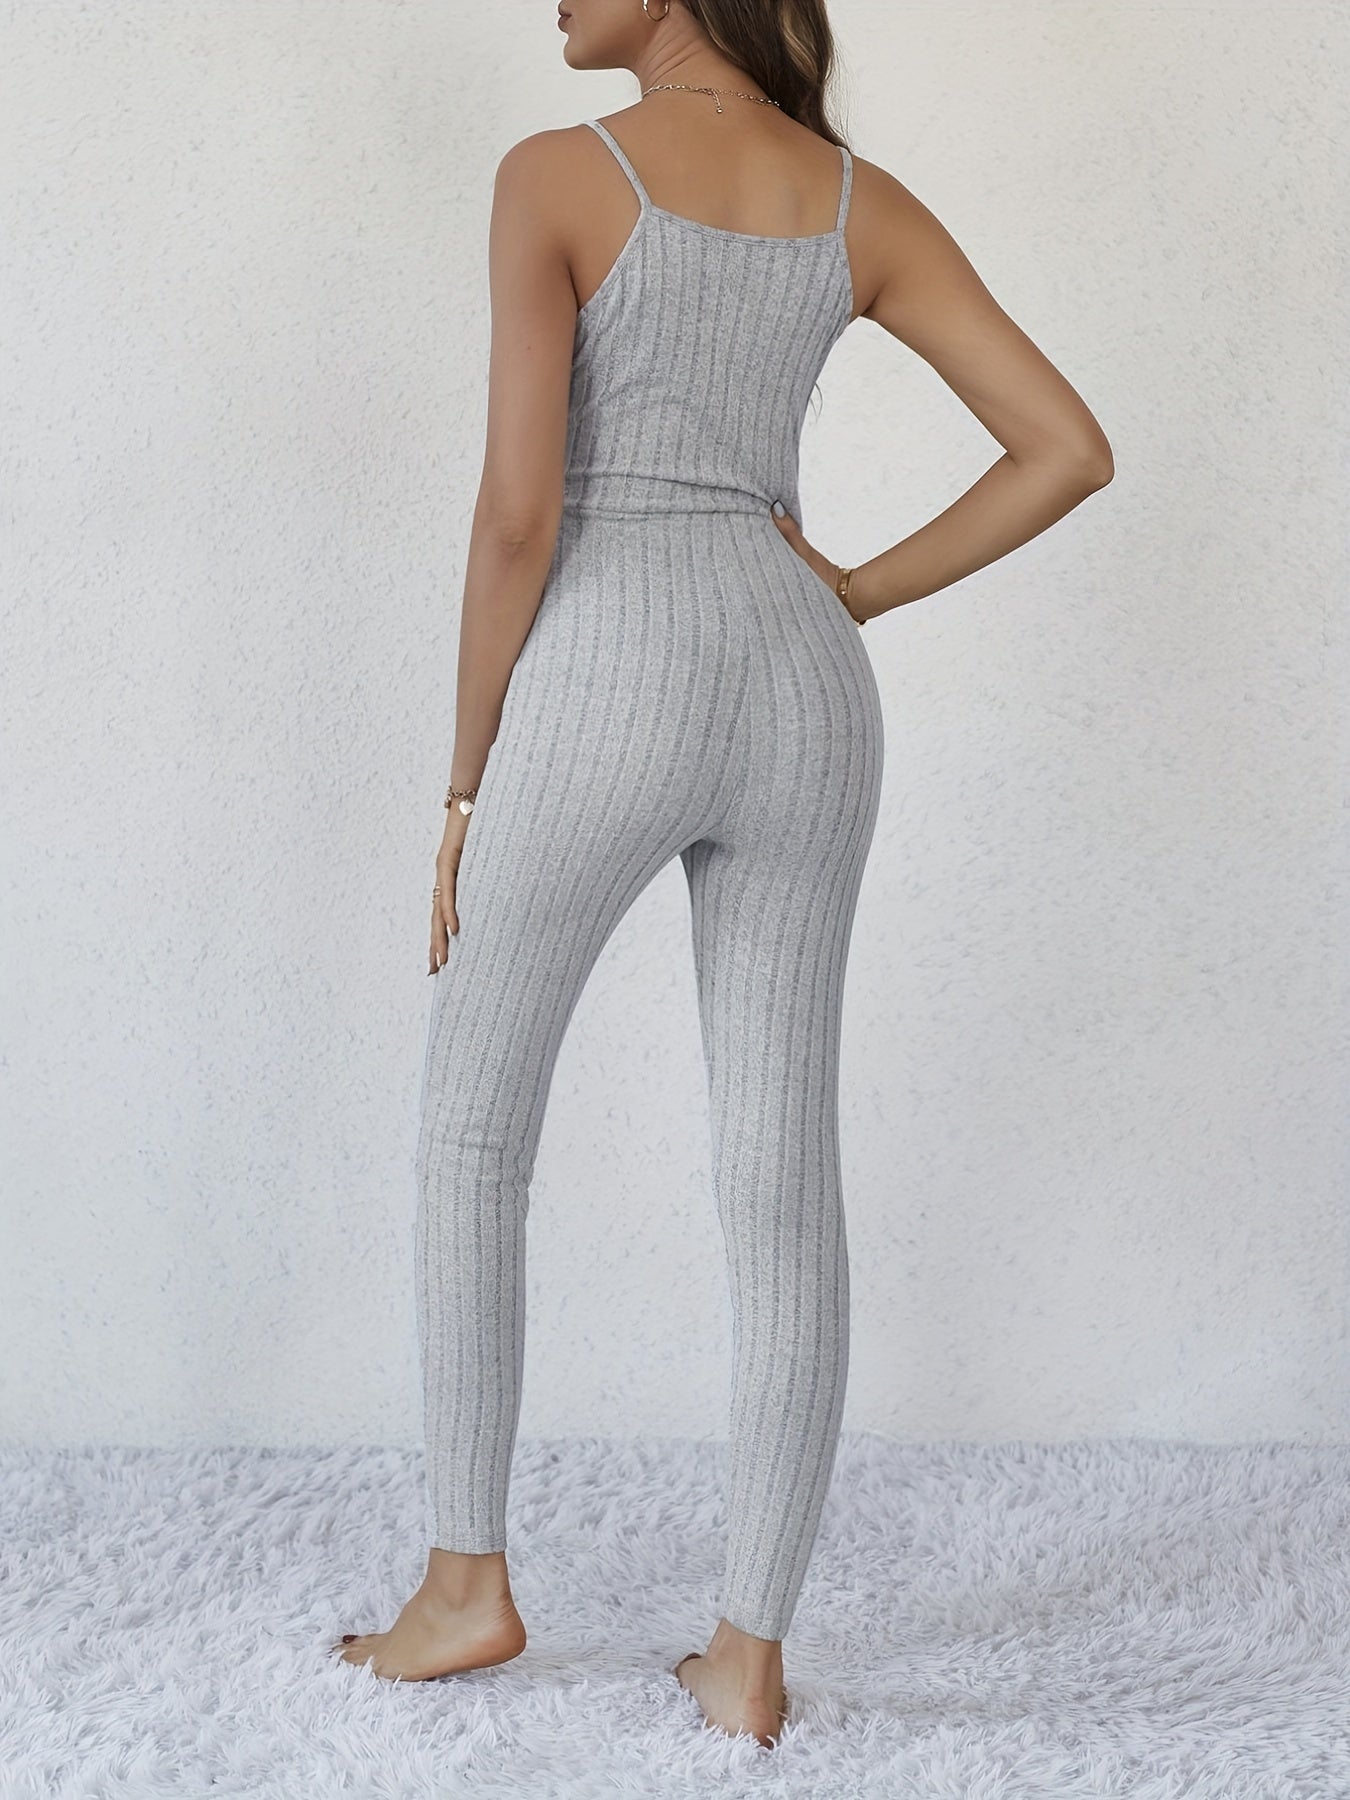 Solid Spaghetti Strap Jumpsuit, Sexy Sleeveless Skinny Jumpsuit, Women's Clothing